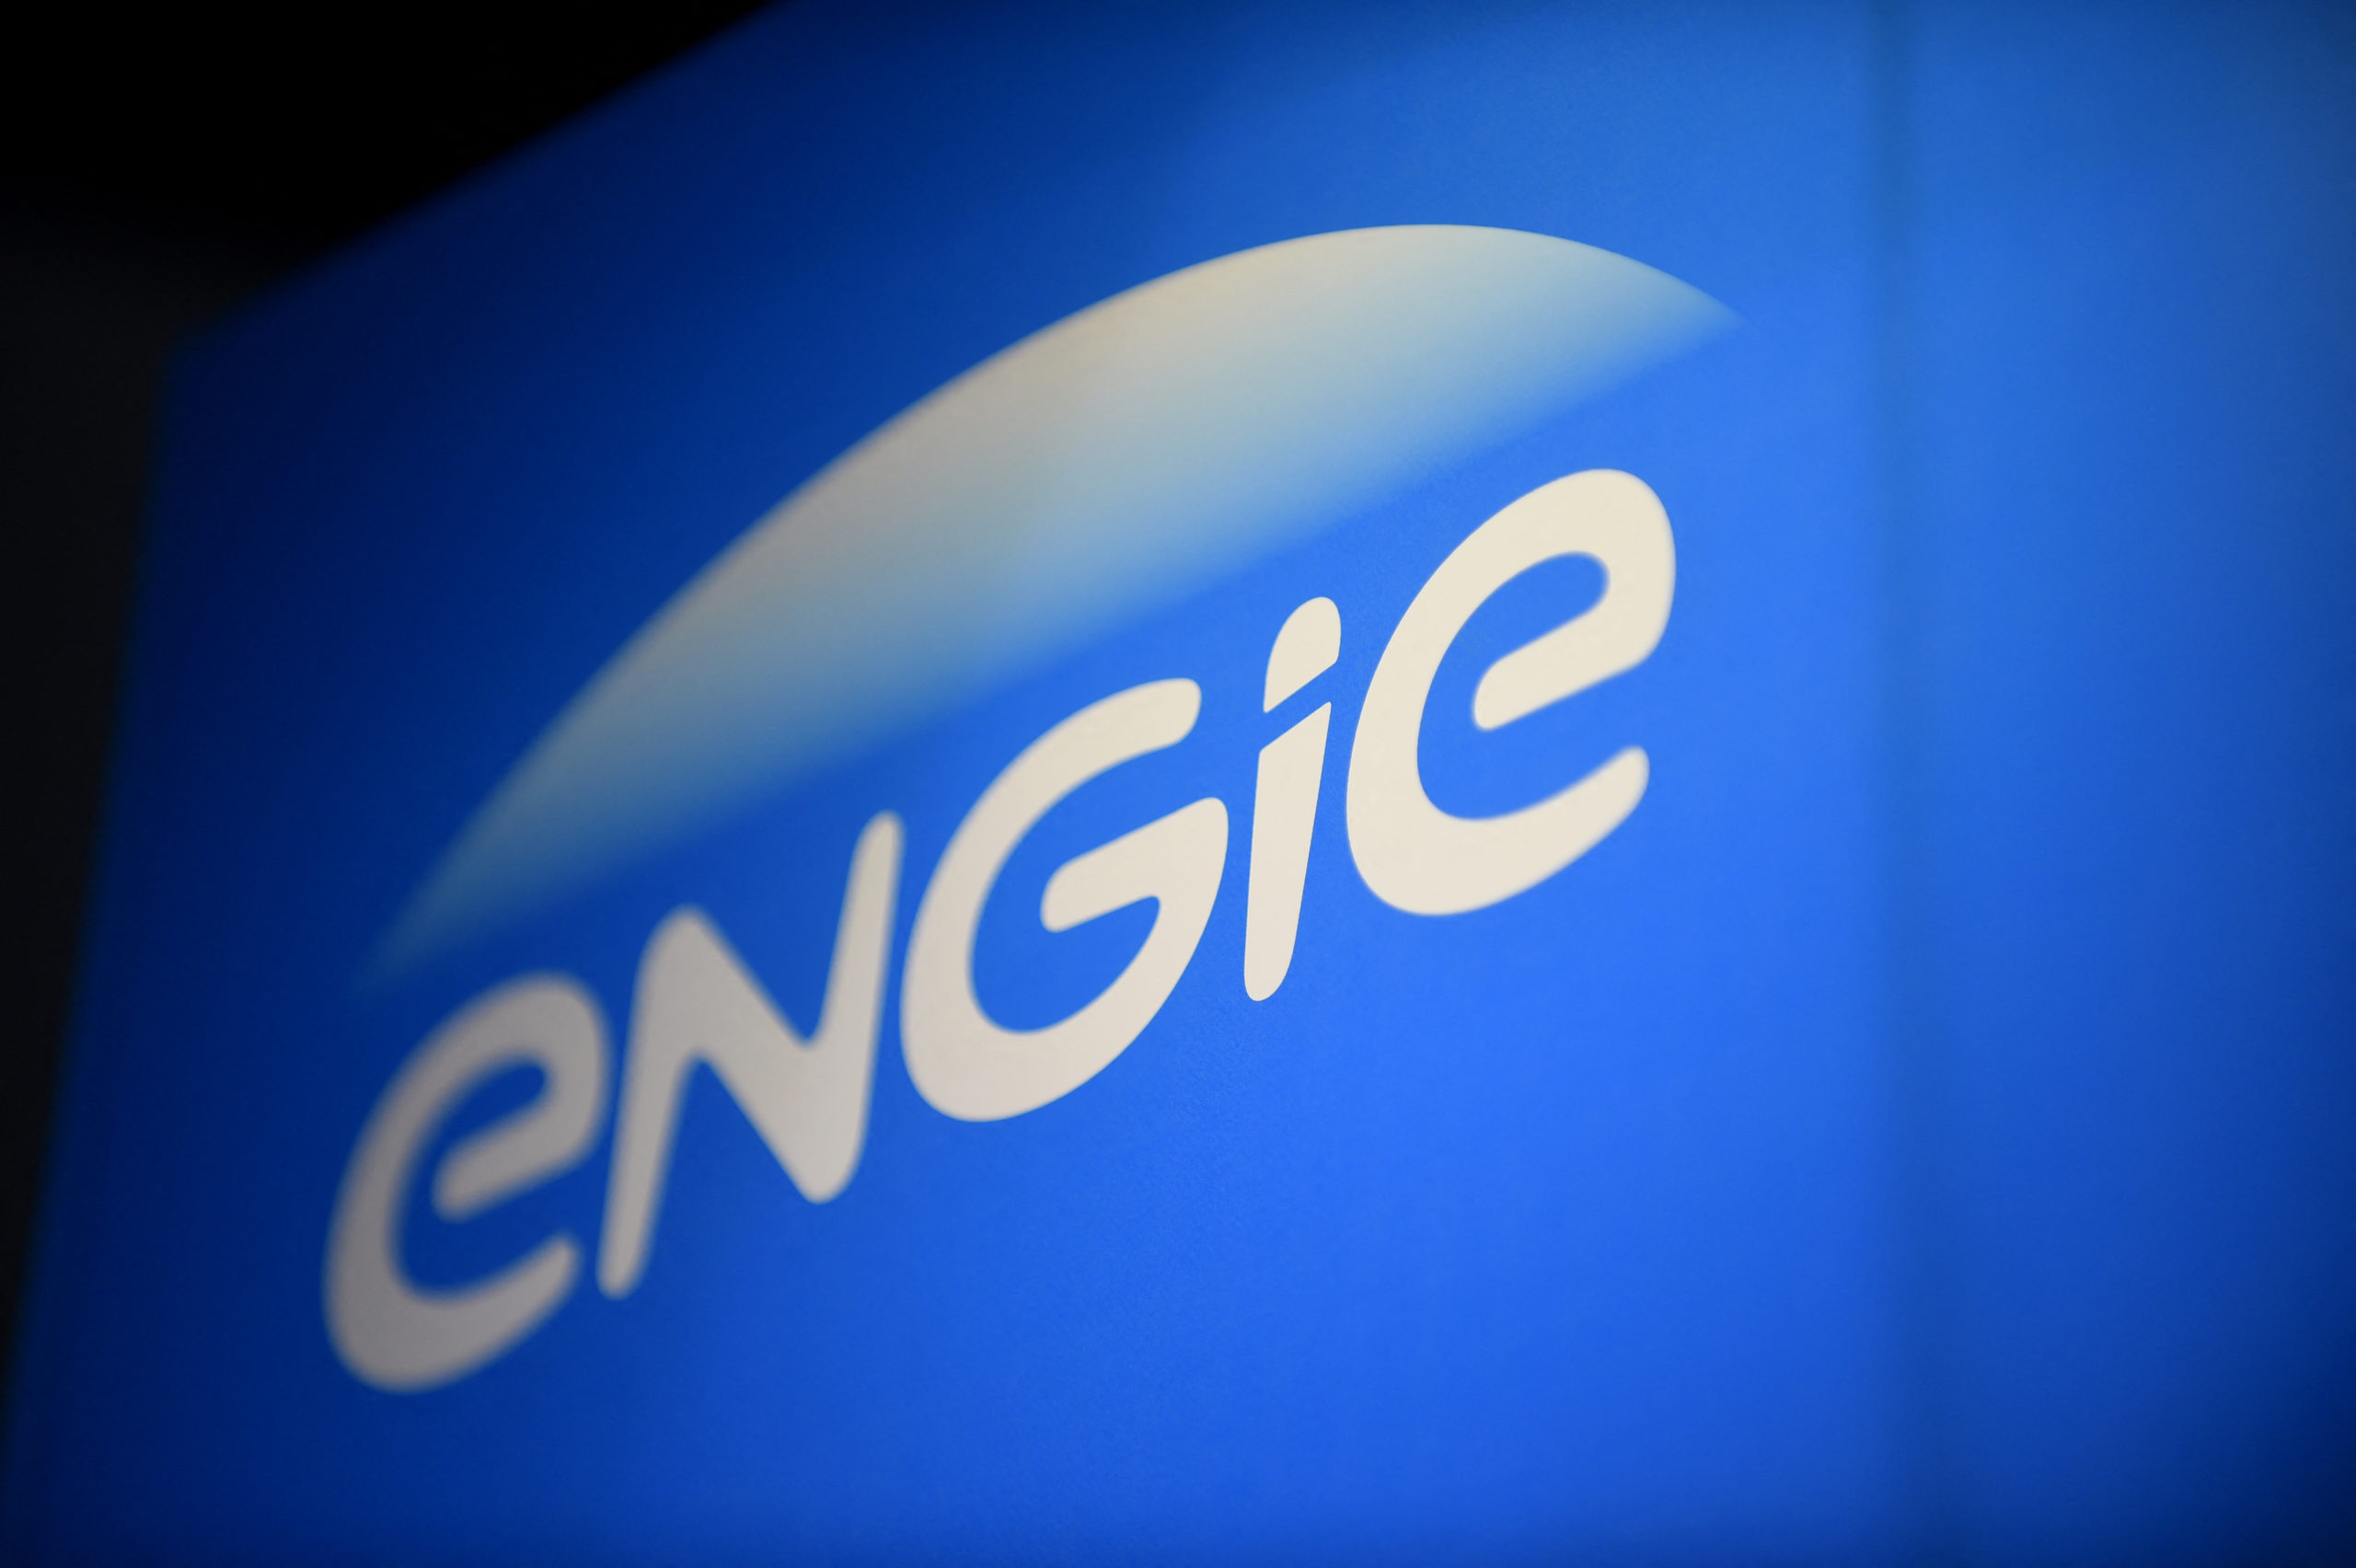 Engie sees Belgian nuclear phase-out inevitable